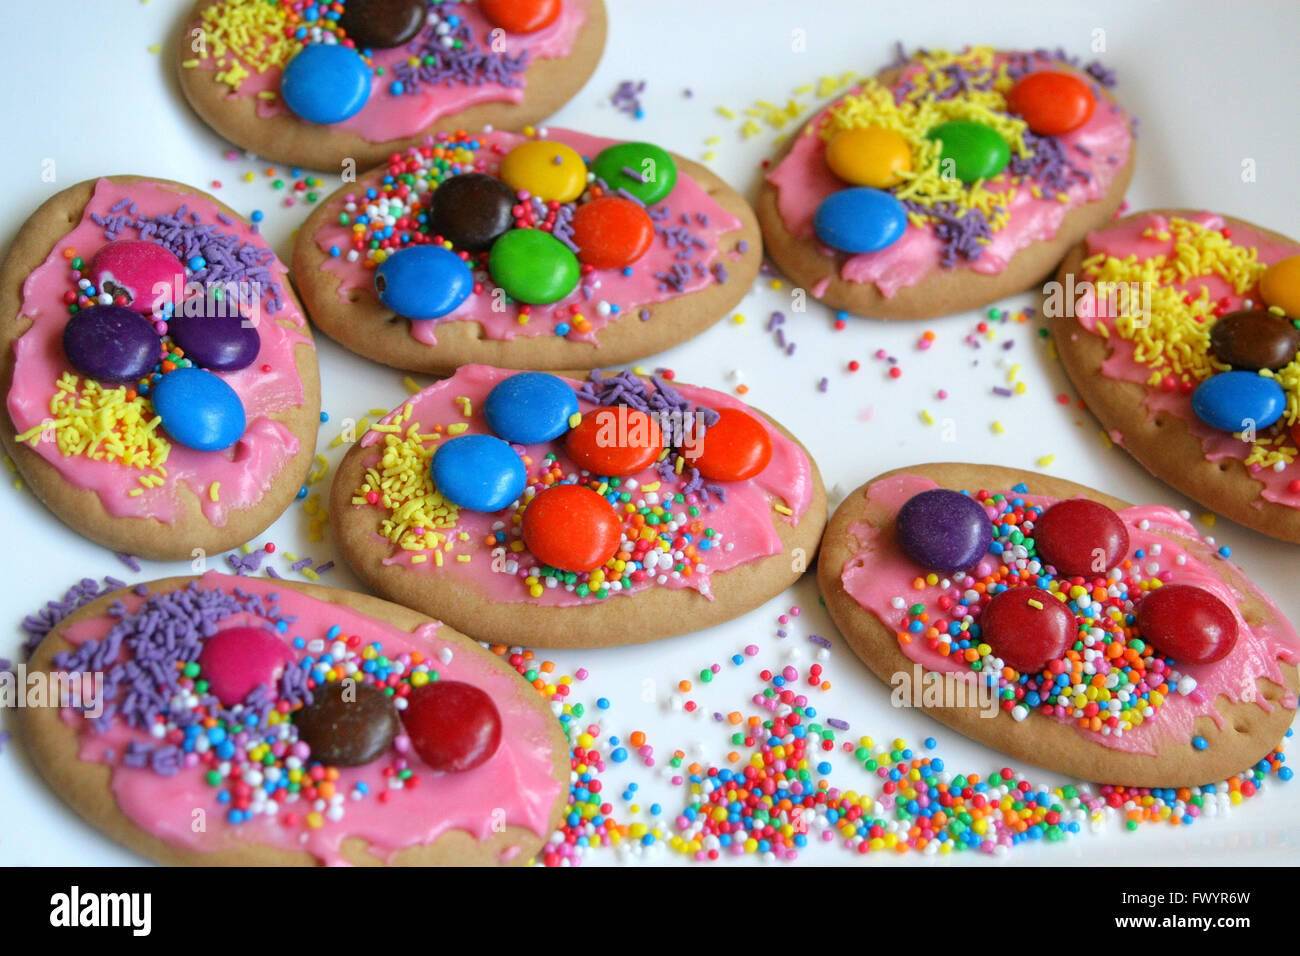 Cookies or biscuits, decorated with sprinkles and candy. Stock Photo